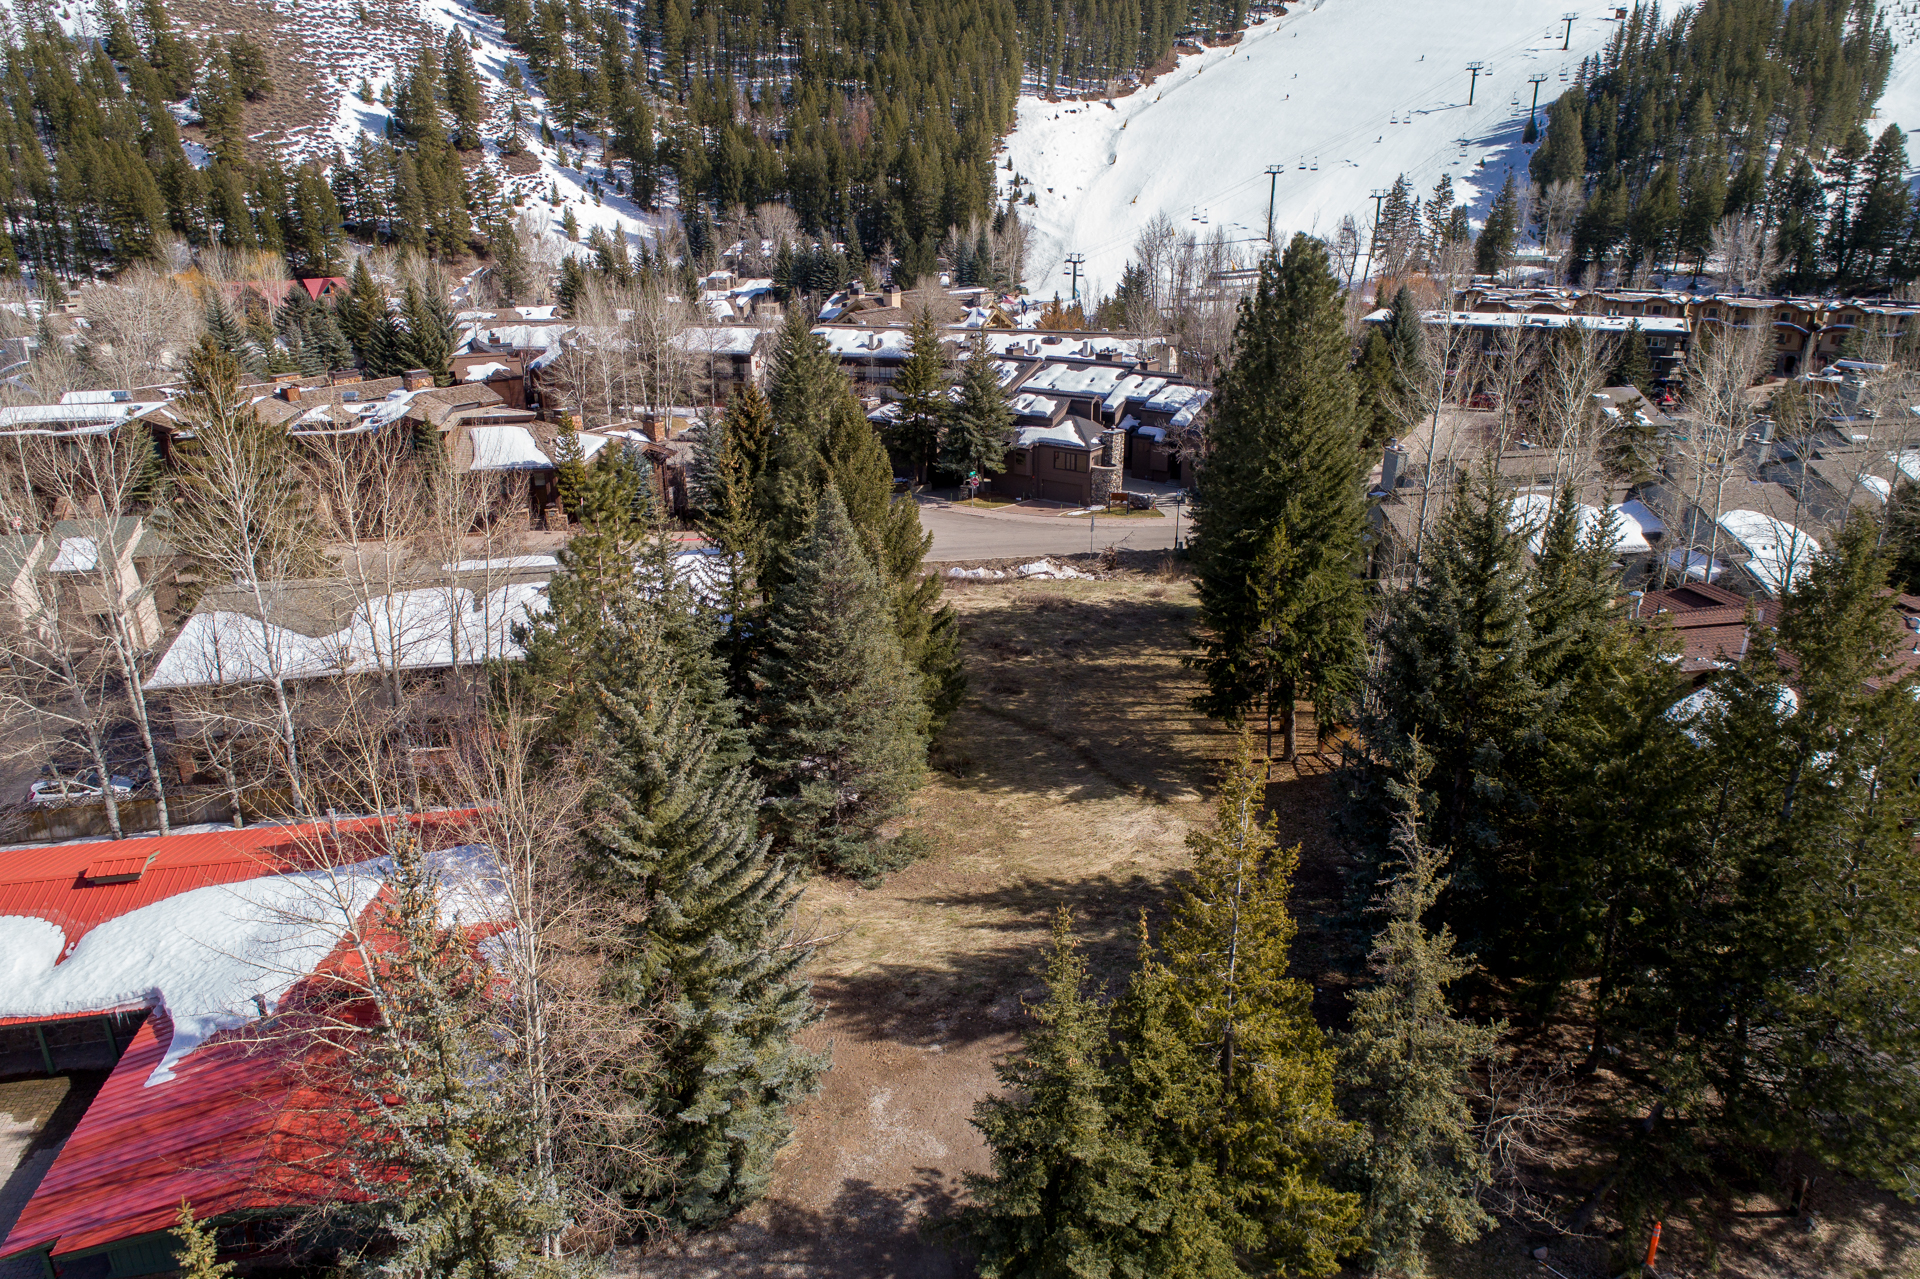 Imagine a Hotel on this Development Parcel in Warm Springs in Ketchum, Idaho 